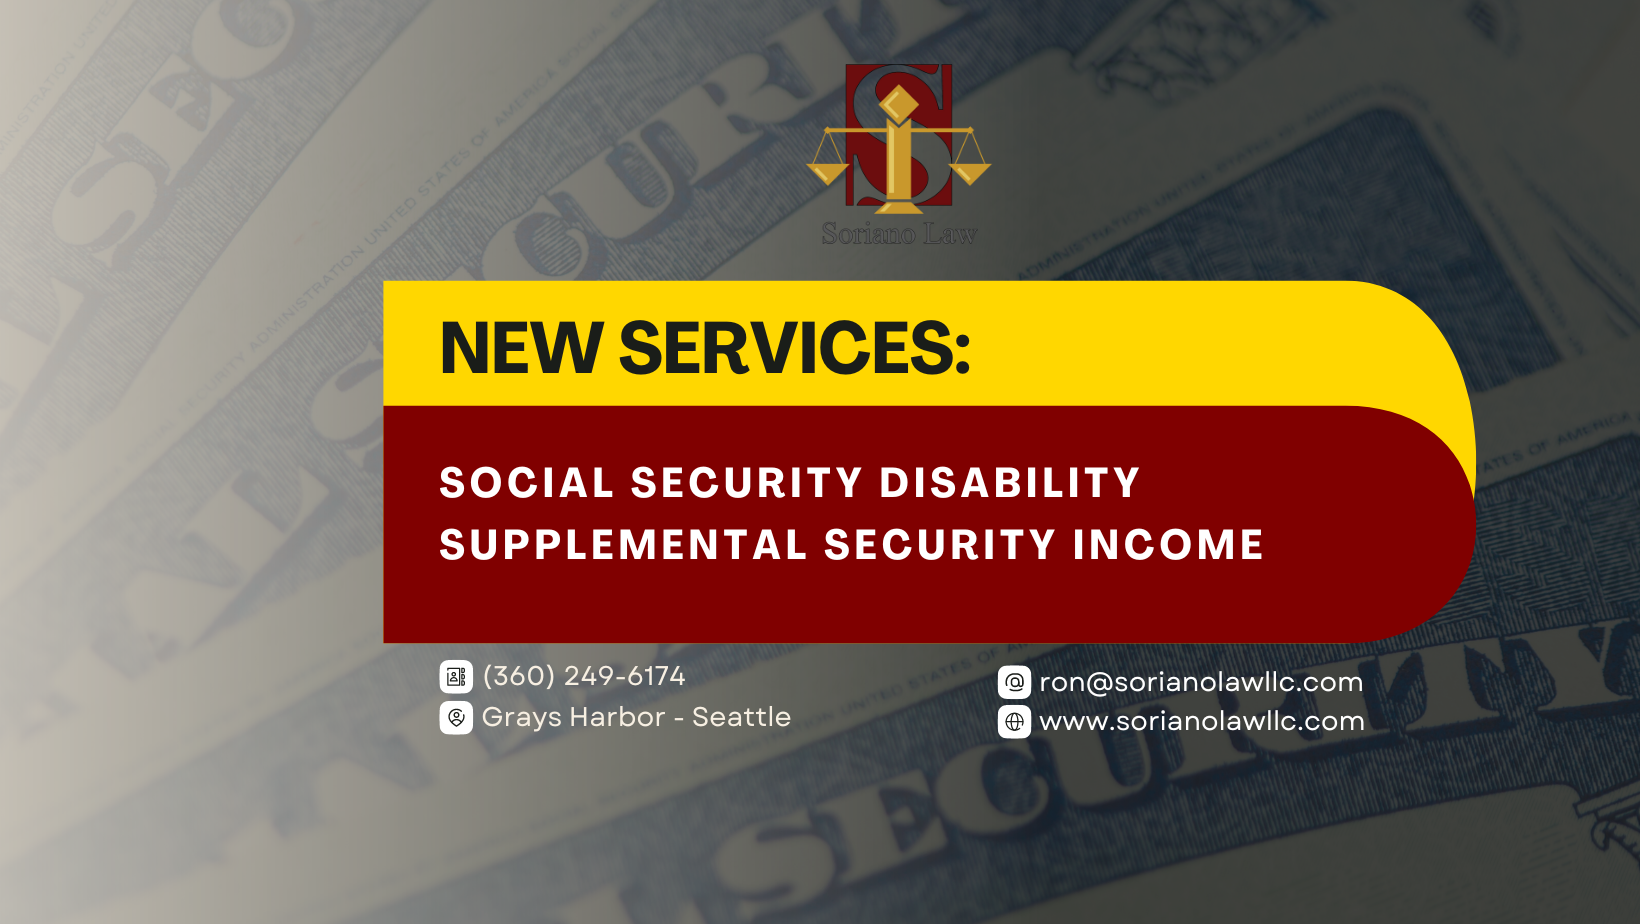 What You Need To Know About Social Security Disability and Supplemental Security Income